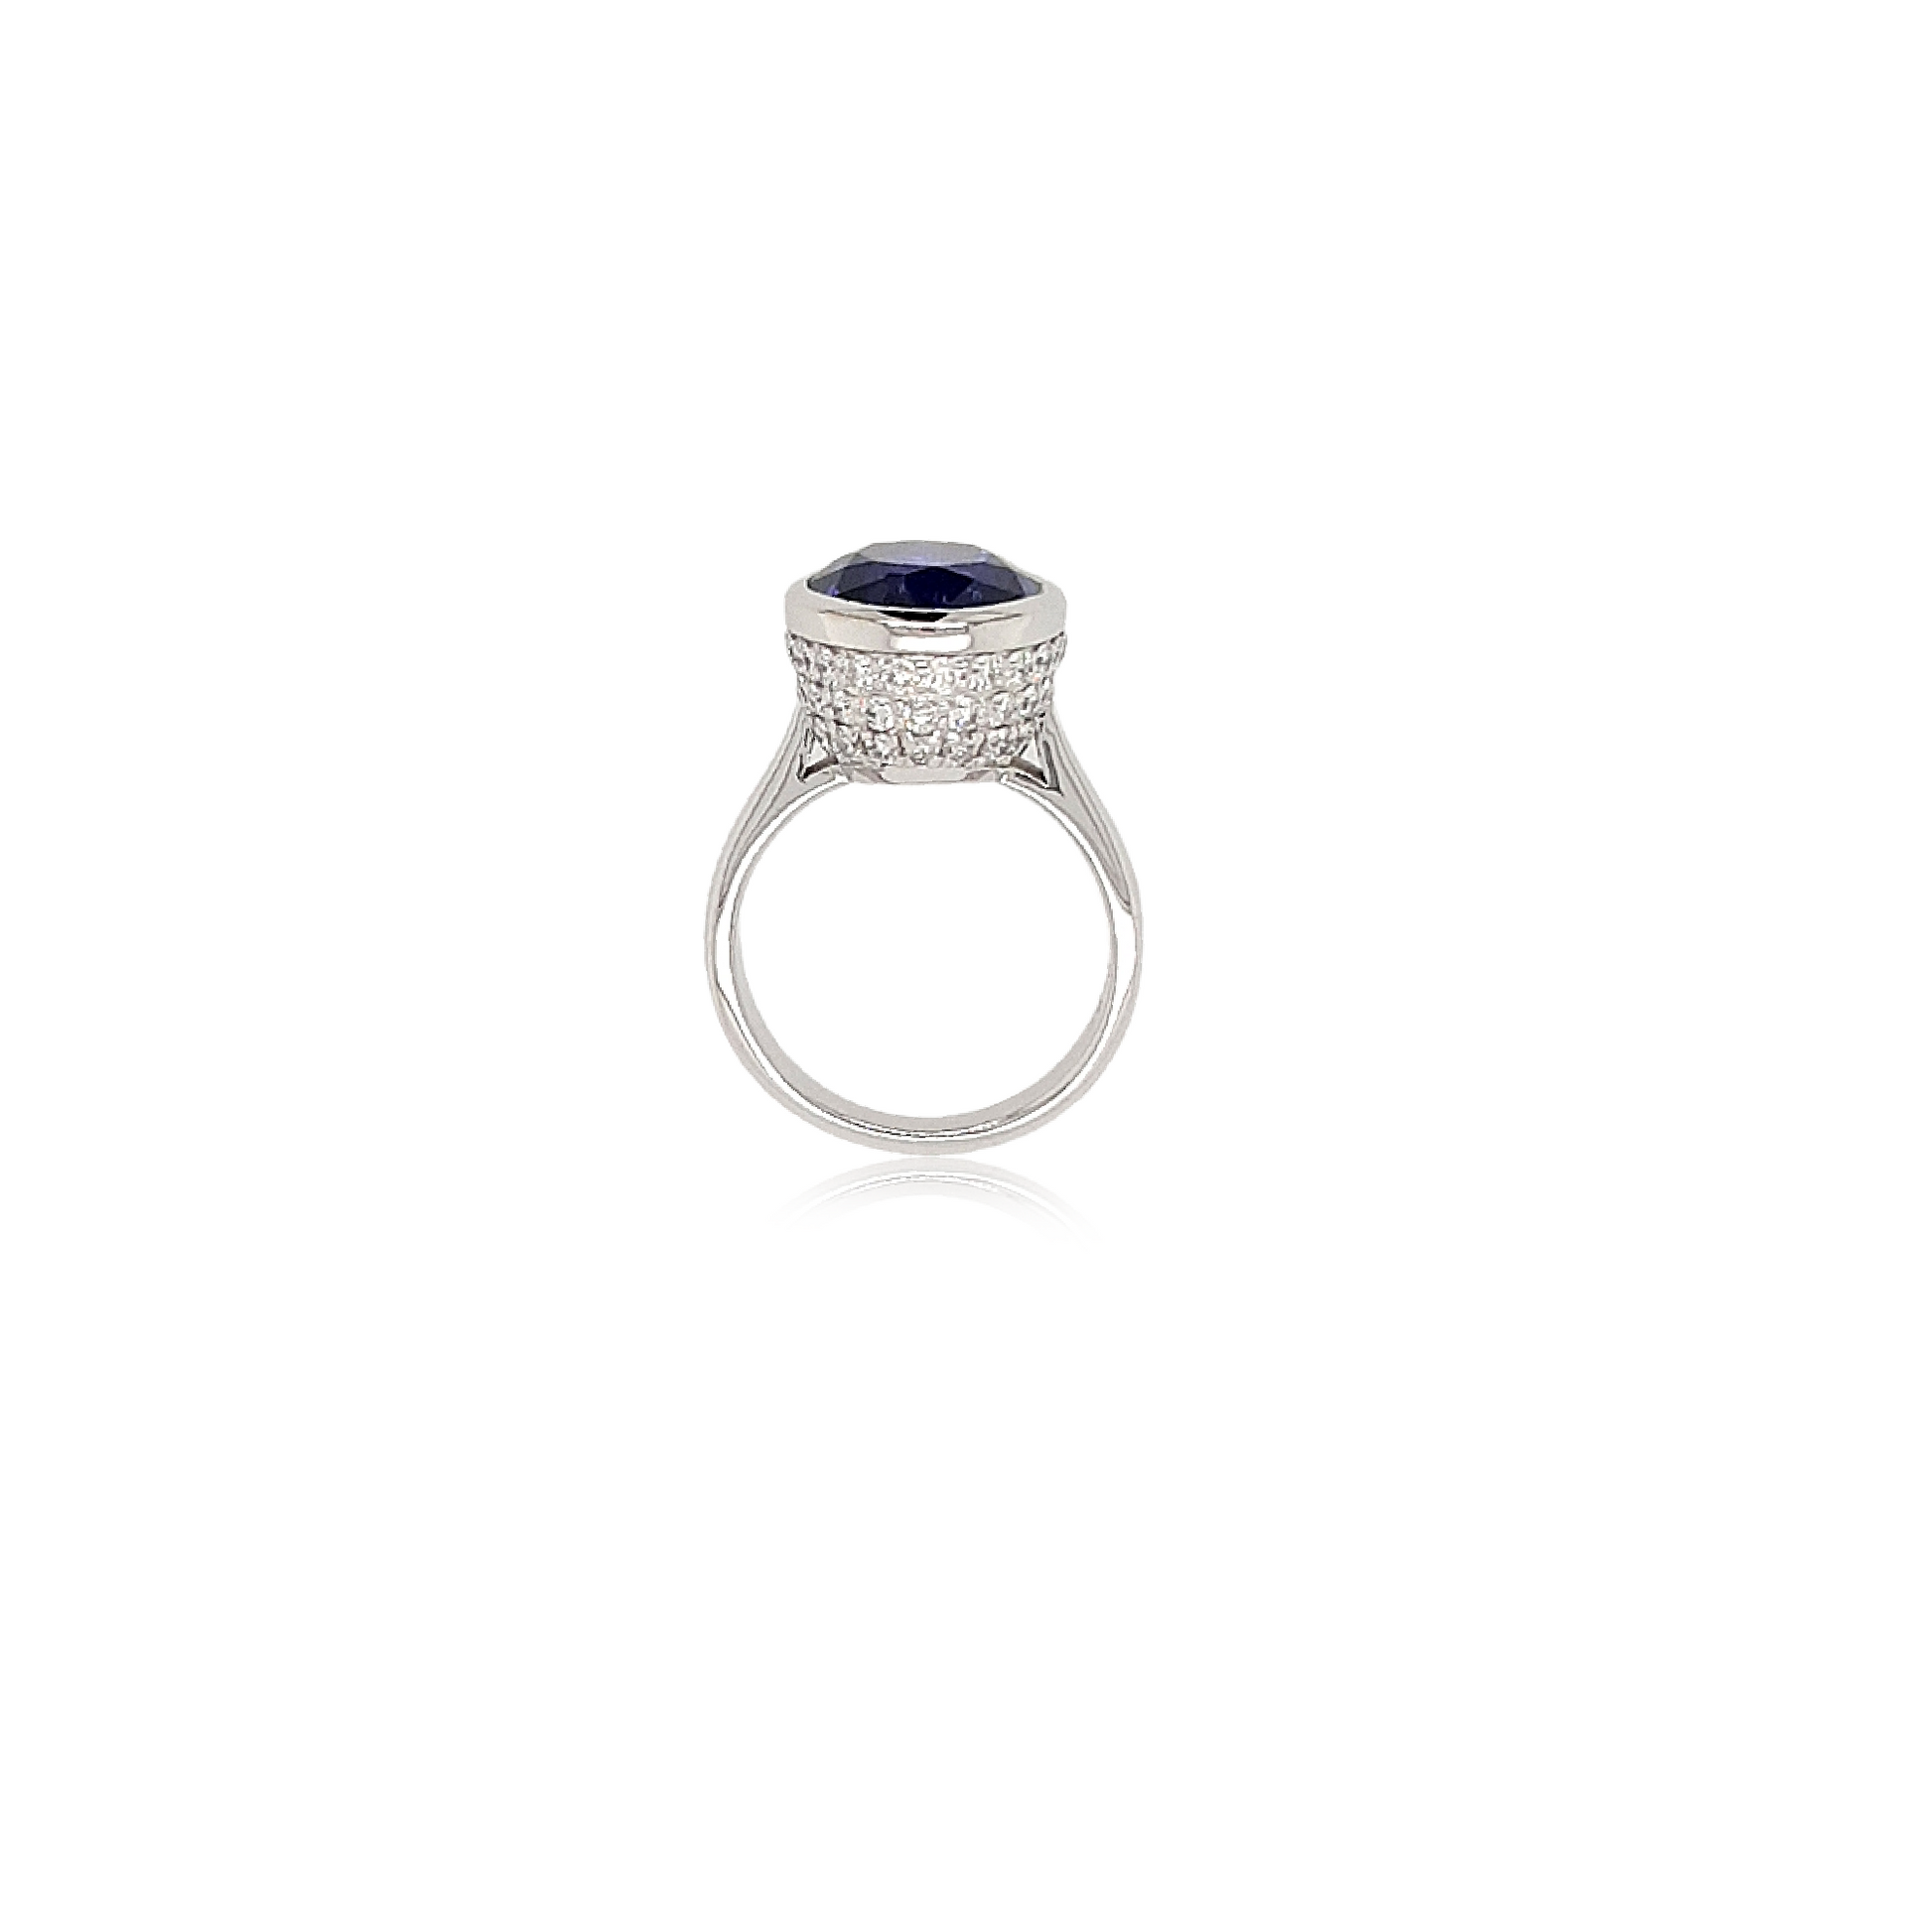 "Oval Tanzanite and Diamond Ring with Brilliant Blue Gemstone" "Elegant Oval Tanzanite Ring Accented with Sparkling Diamonds" "Tanzanite Engagement Ring Featuring an Oval Gemstone and Diamonds" "Luxurious Oval Tanzanite and Diamond Cocktail Ring" "Oval Cut Tanzanite Ring Surrounded by Glittering Diamond Accents" "Exquisite Oval Tanzanite and Diamond Halo Ring" "Oval Tanzanite Engagement Ring with Diamond Pave Setting" "Oval Tanzanite and Diamond Statement Ring for a Touch of Glamour"